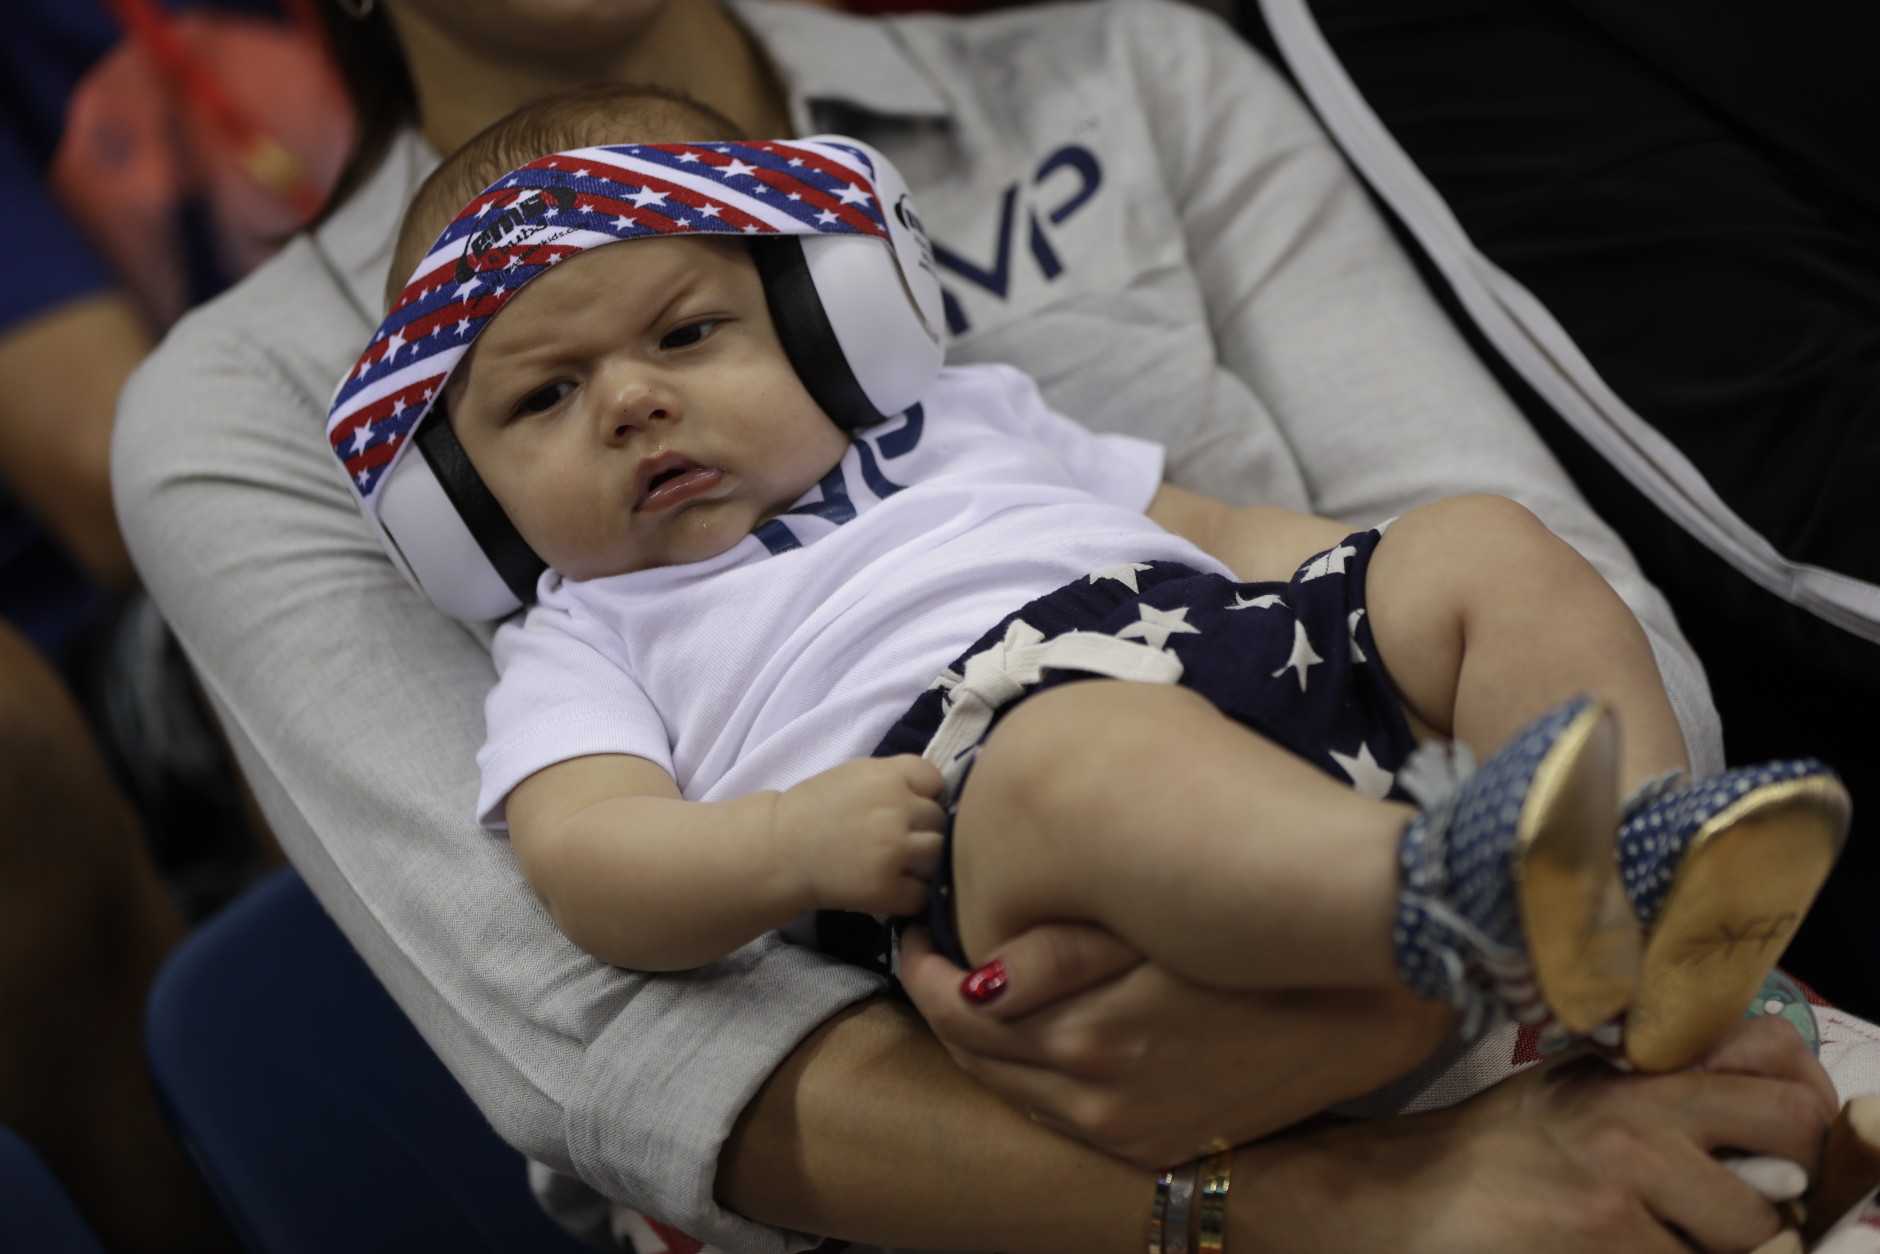 United States' Michael Phelps' son Boomer wears ear protection during the swimming competitions at the 2016 Summer Olympics, Monday, Aug. 8, 2016, in Rio de Janeiro, Brazil. (AP Photo/Michael Sohn)